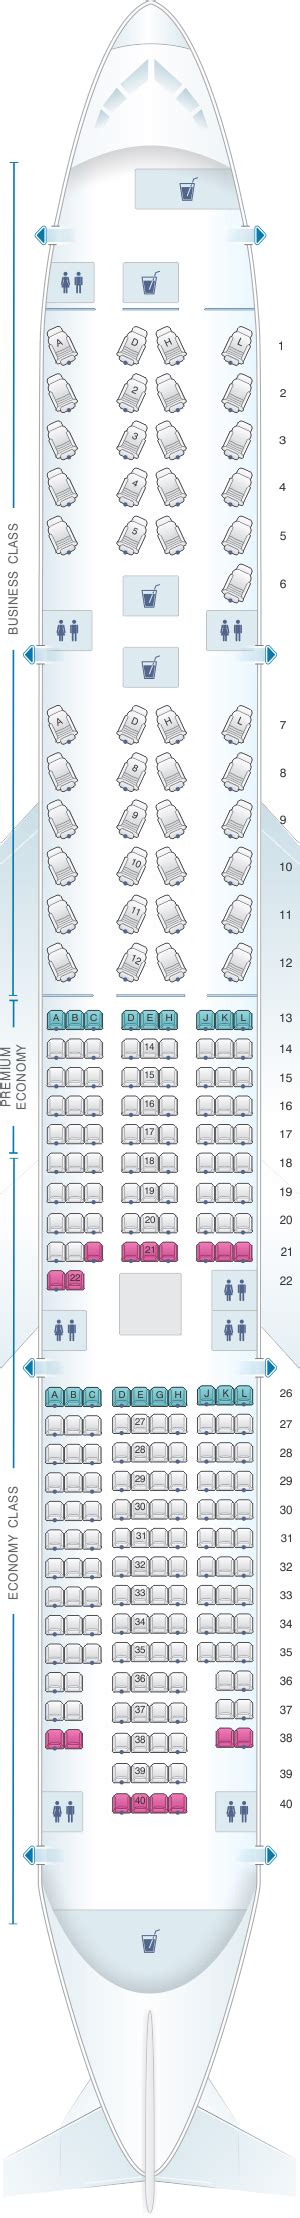 American Airlines Seat Chart